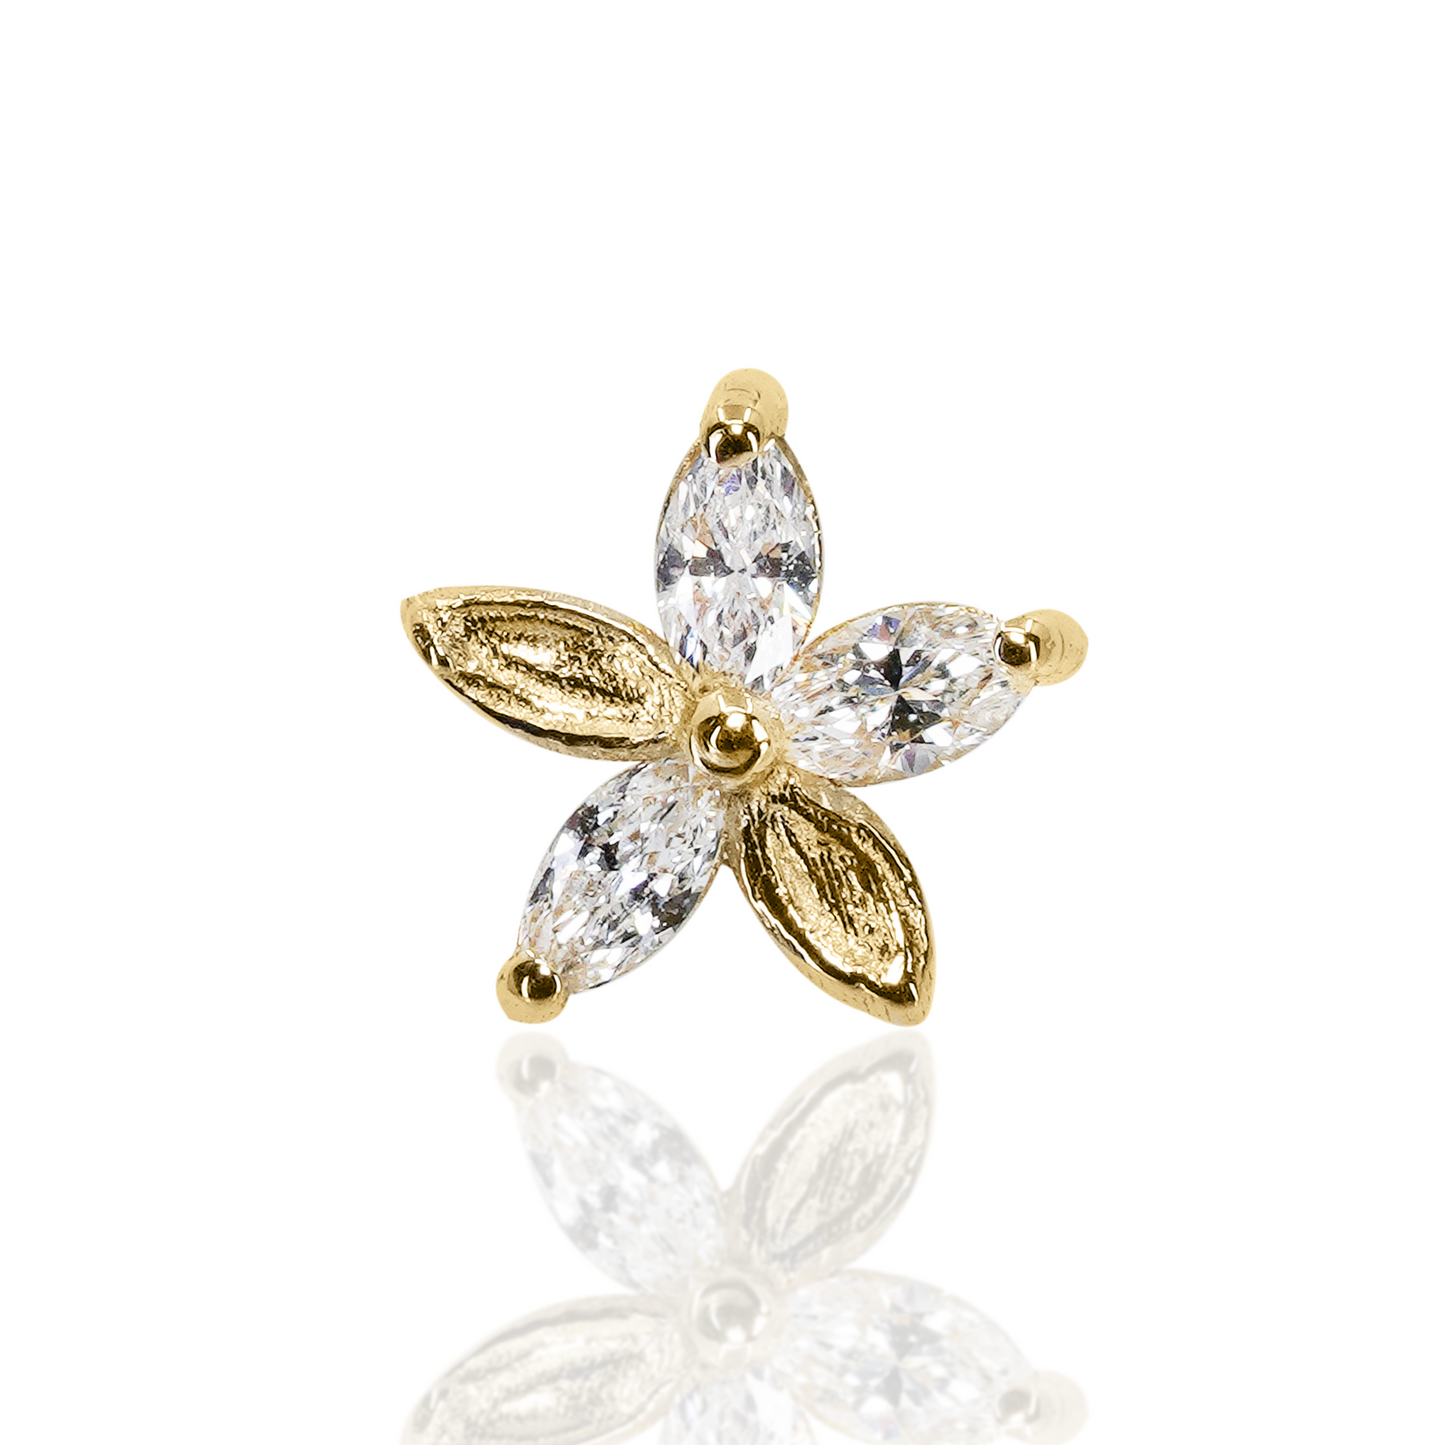 Monet's Lily Threaded End with Diamonds